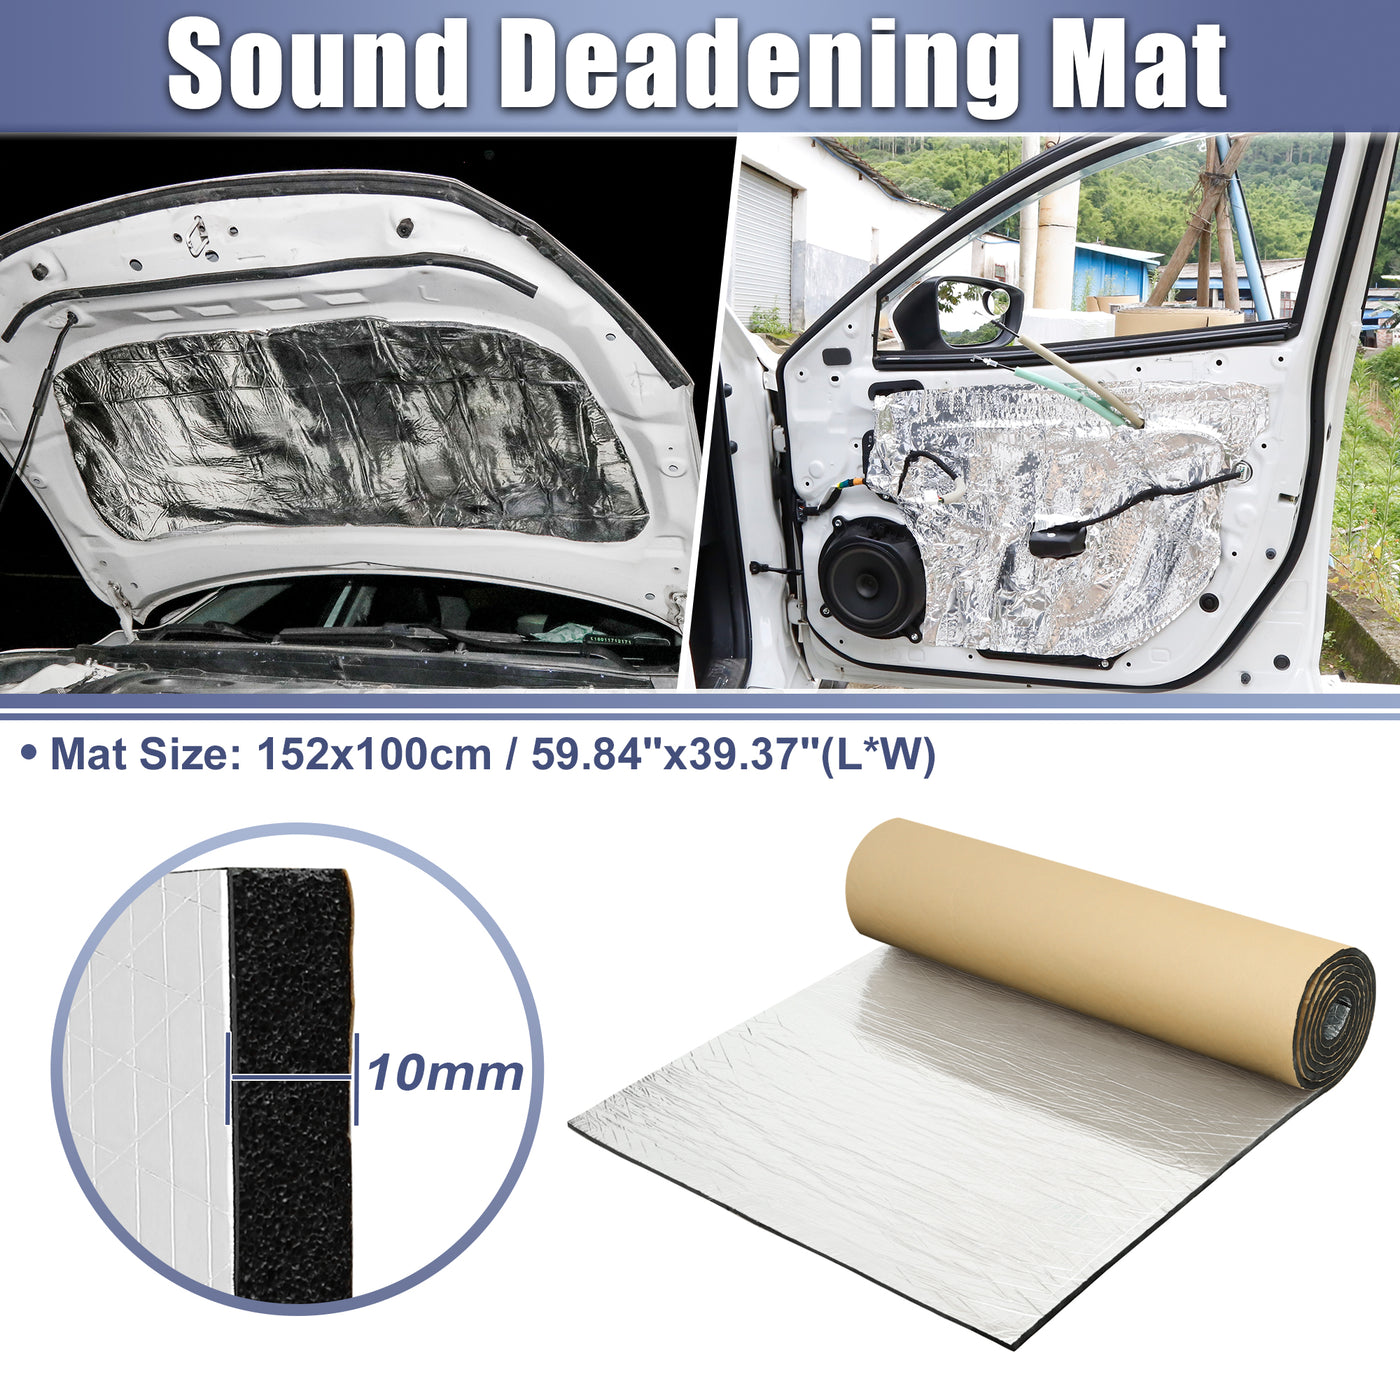 X AUTOHAUX 394mil 10mm 16.36sqft Car Sound Deadening Mat Aluminum Foil Closed Cell Foam Heat Shield Material Damping Self Adhesive Universal for Hood Fender Boat Engine Cover 59.84"x39.37"